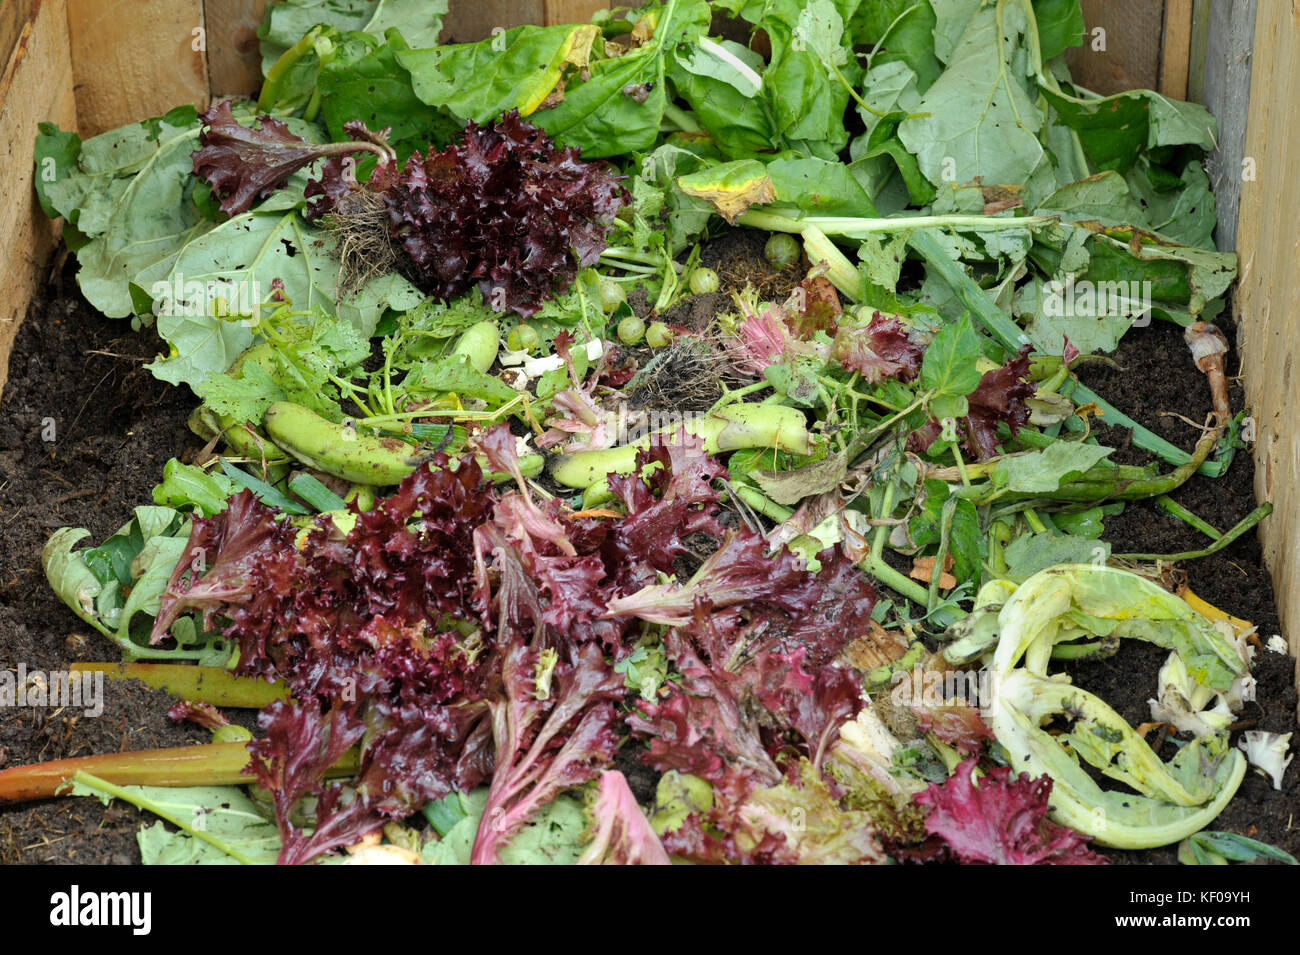 Garden recycling using a compost heap with kitchen food waste and general garden waste material including fruit and vegetables. Stock Photo